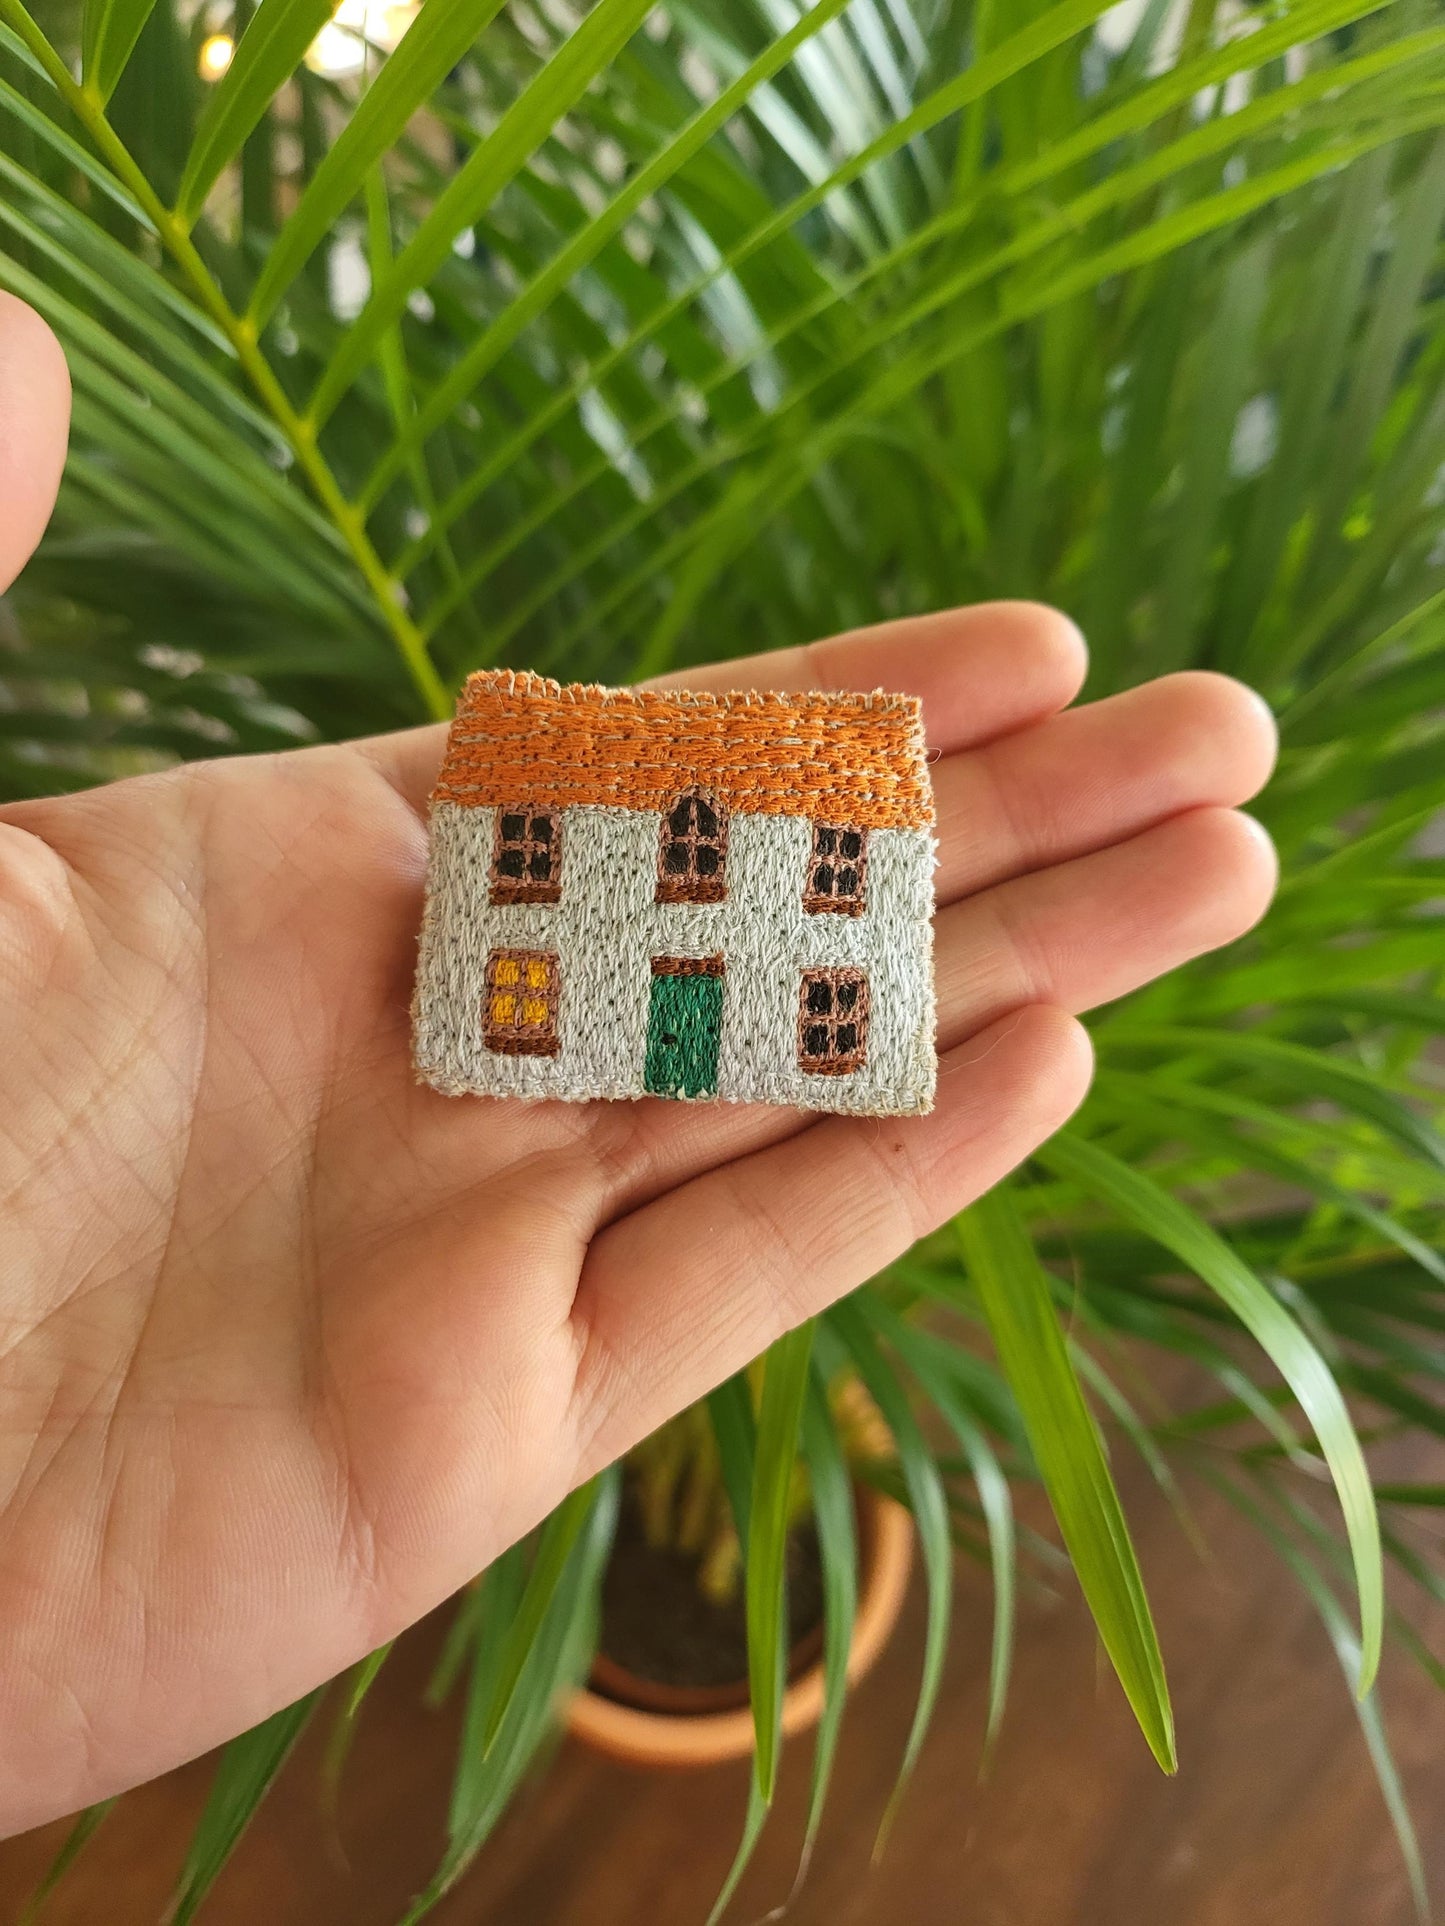 Lisa Toppin |Wee Aberdour House | Embroidered Brooch